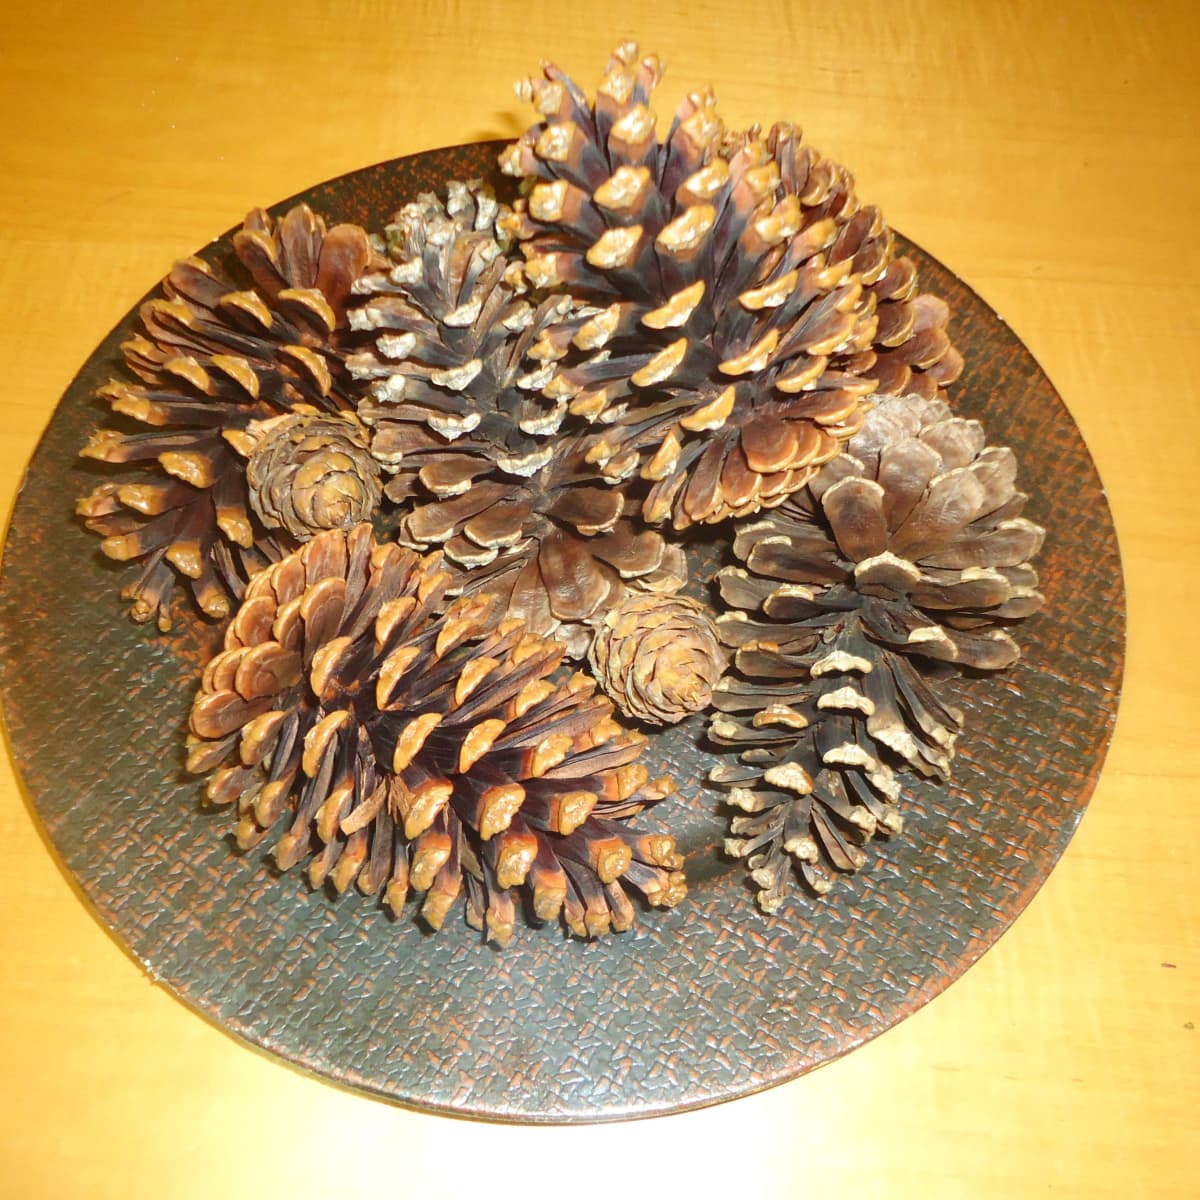 How to Make Scented Pine Cones - FeltMagnet